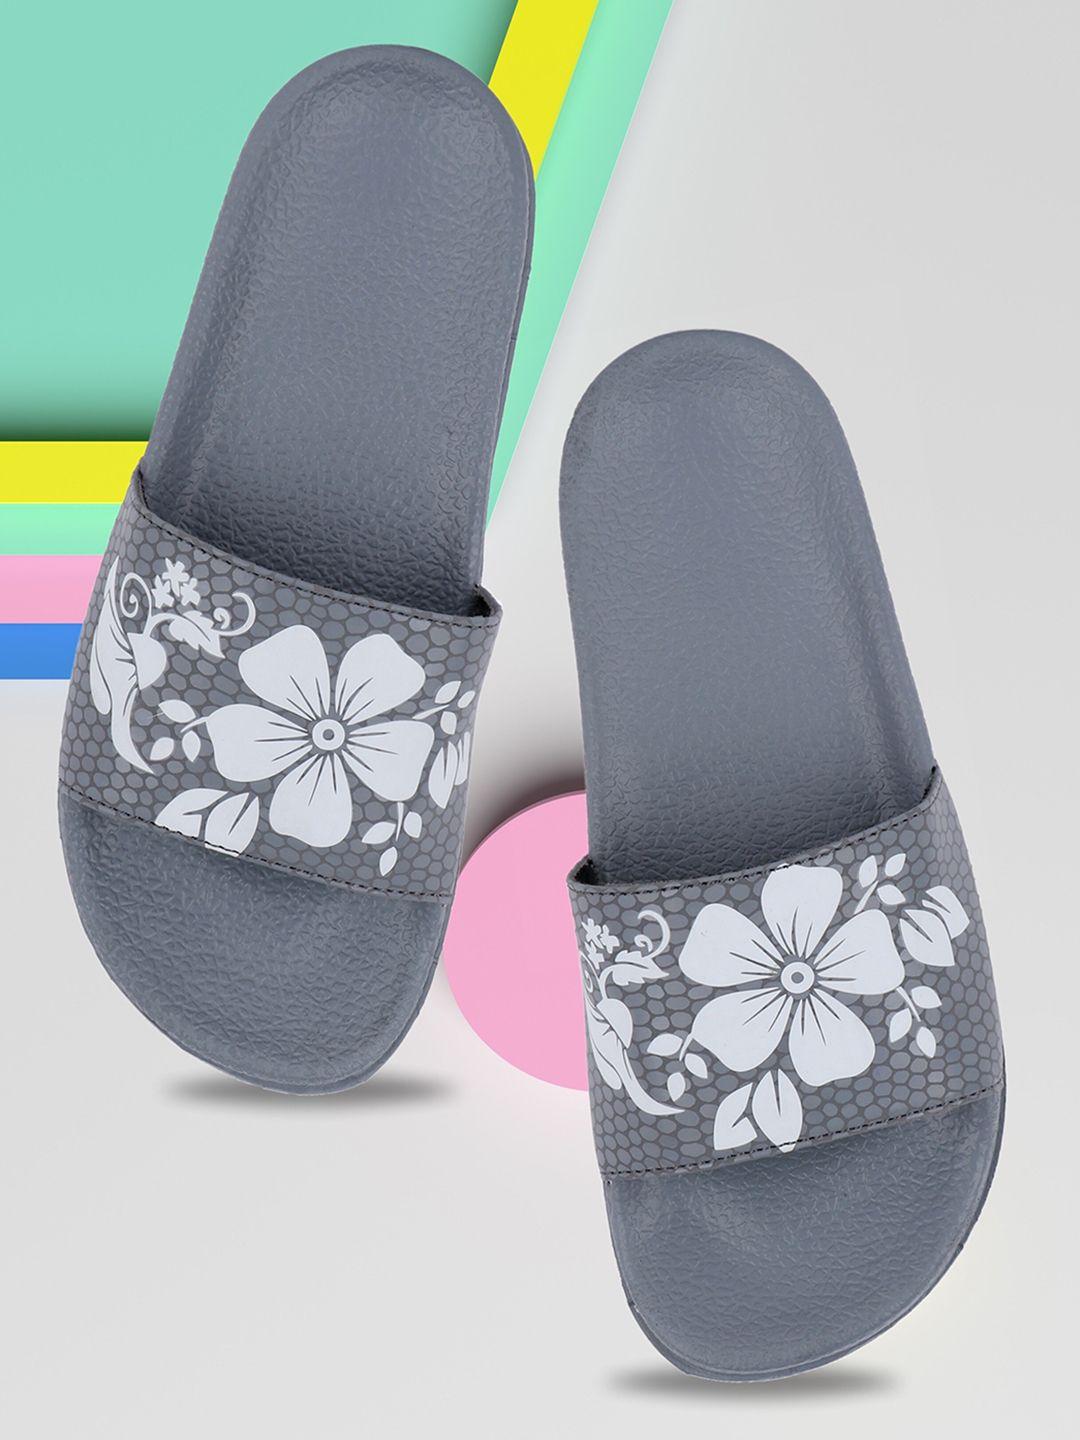 freeco women grey & white floral printed sliders